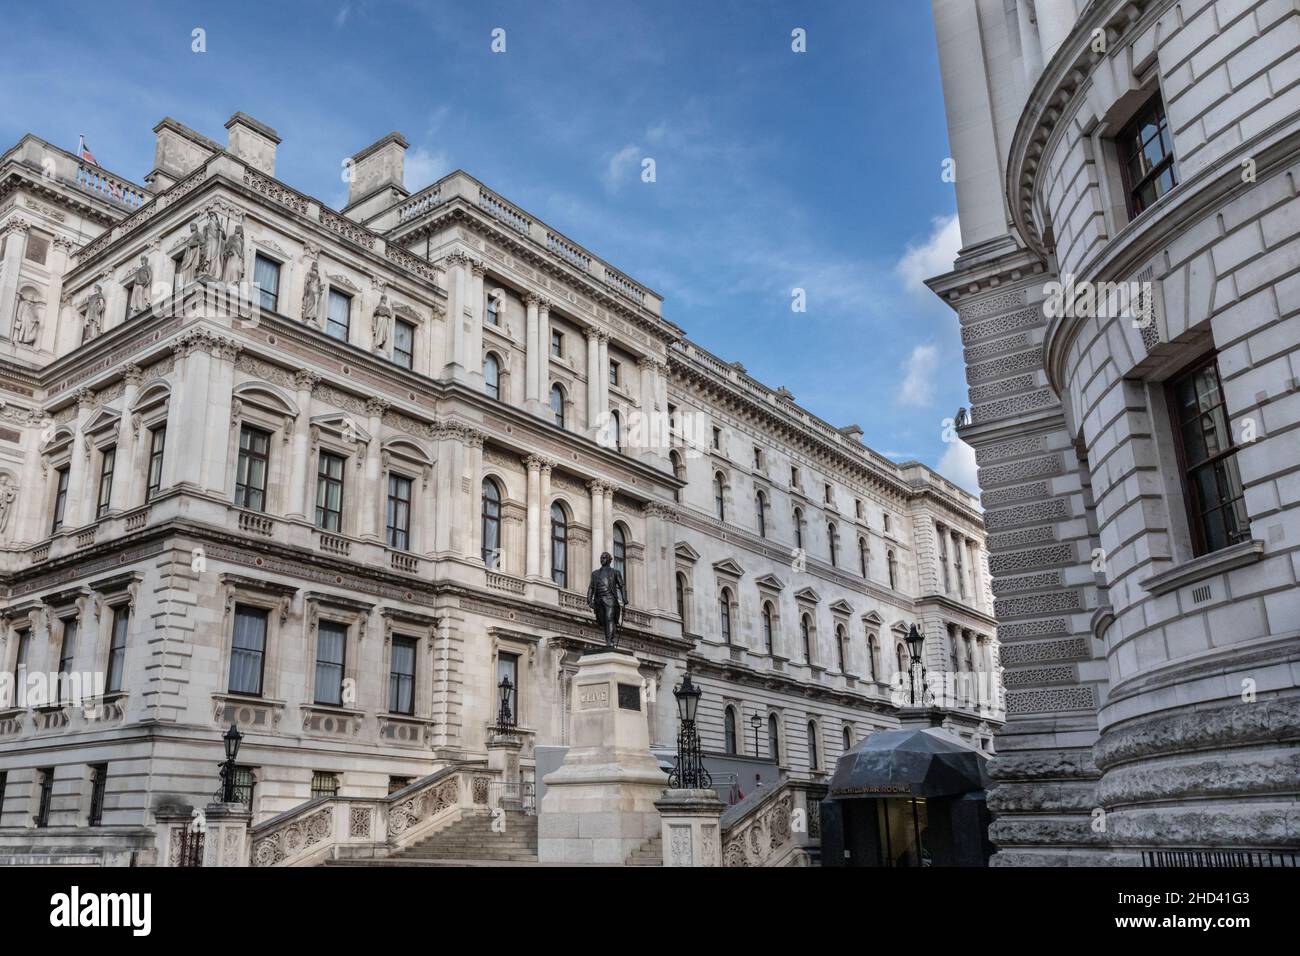 The Foreign and Commonwealth Office, King Charles Street, Whitehall, London, England Stockfoto